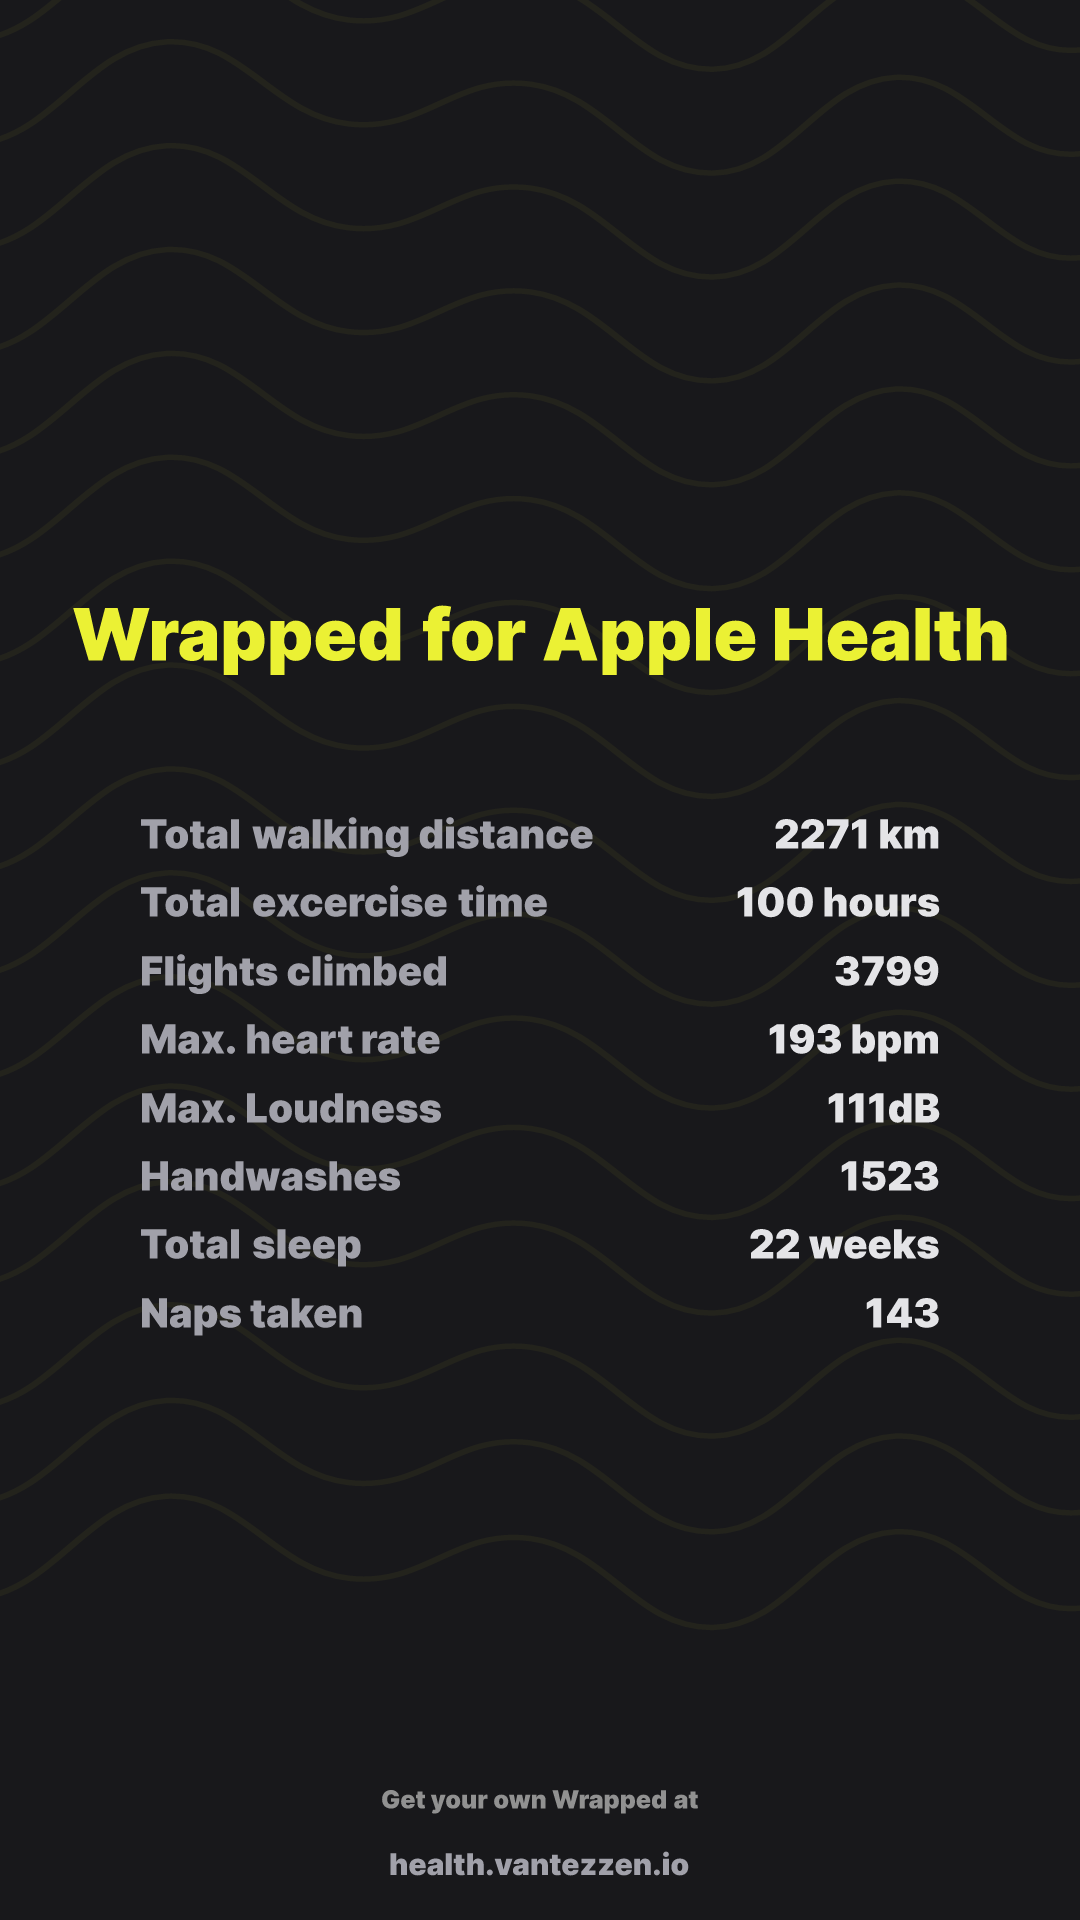 Wrapped for Apple Health